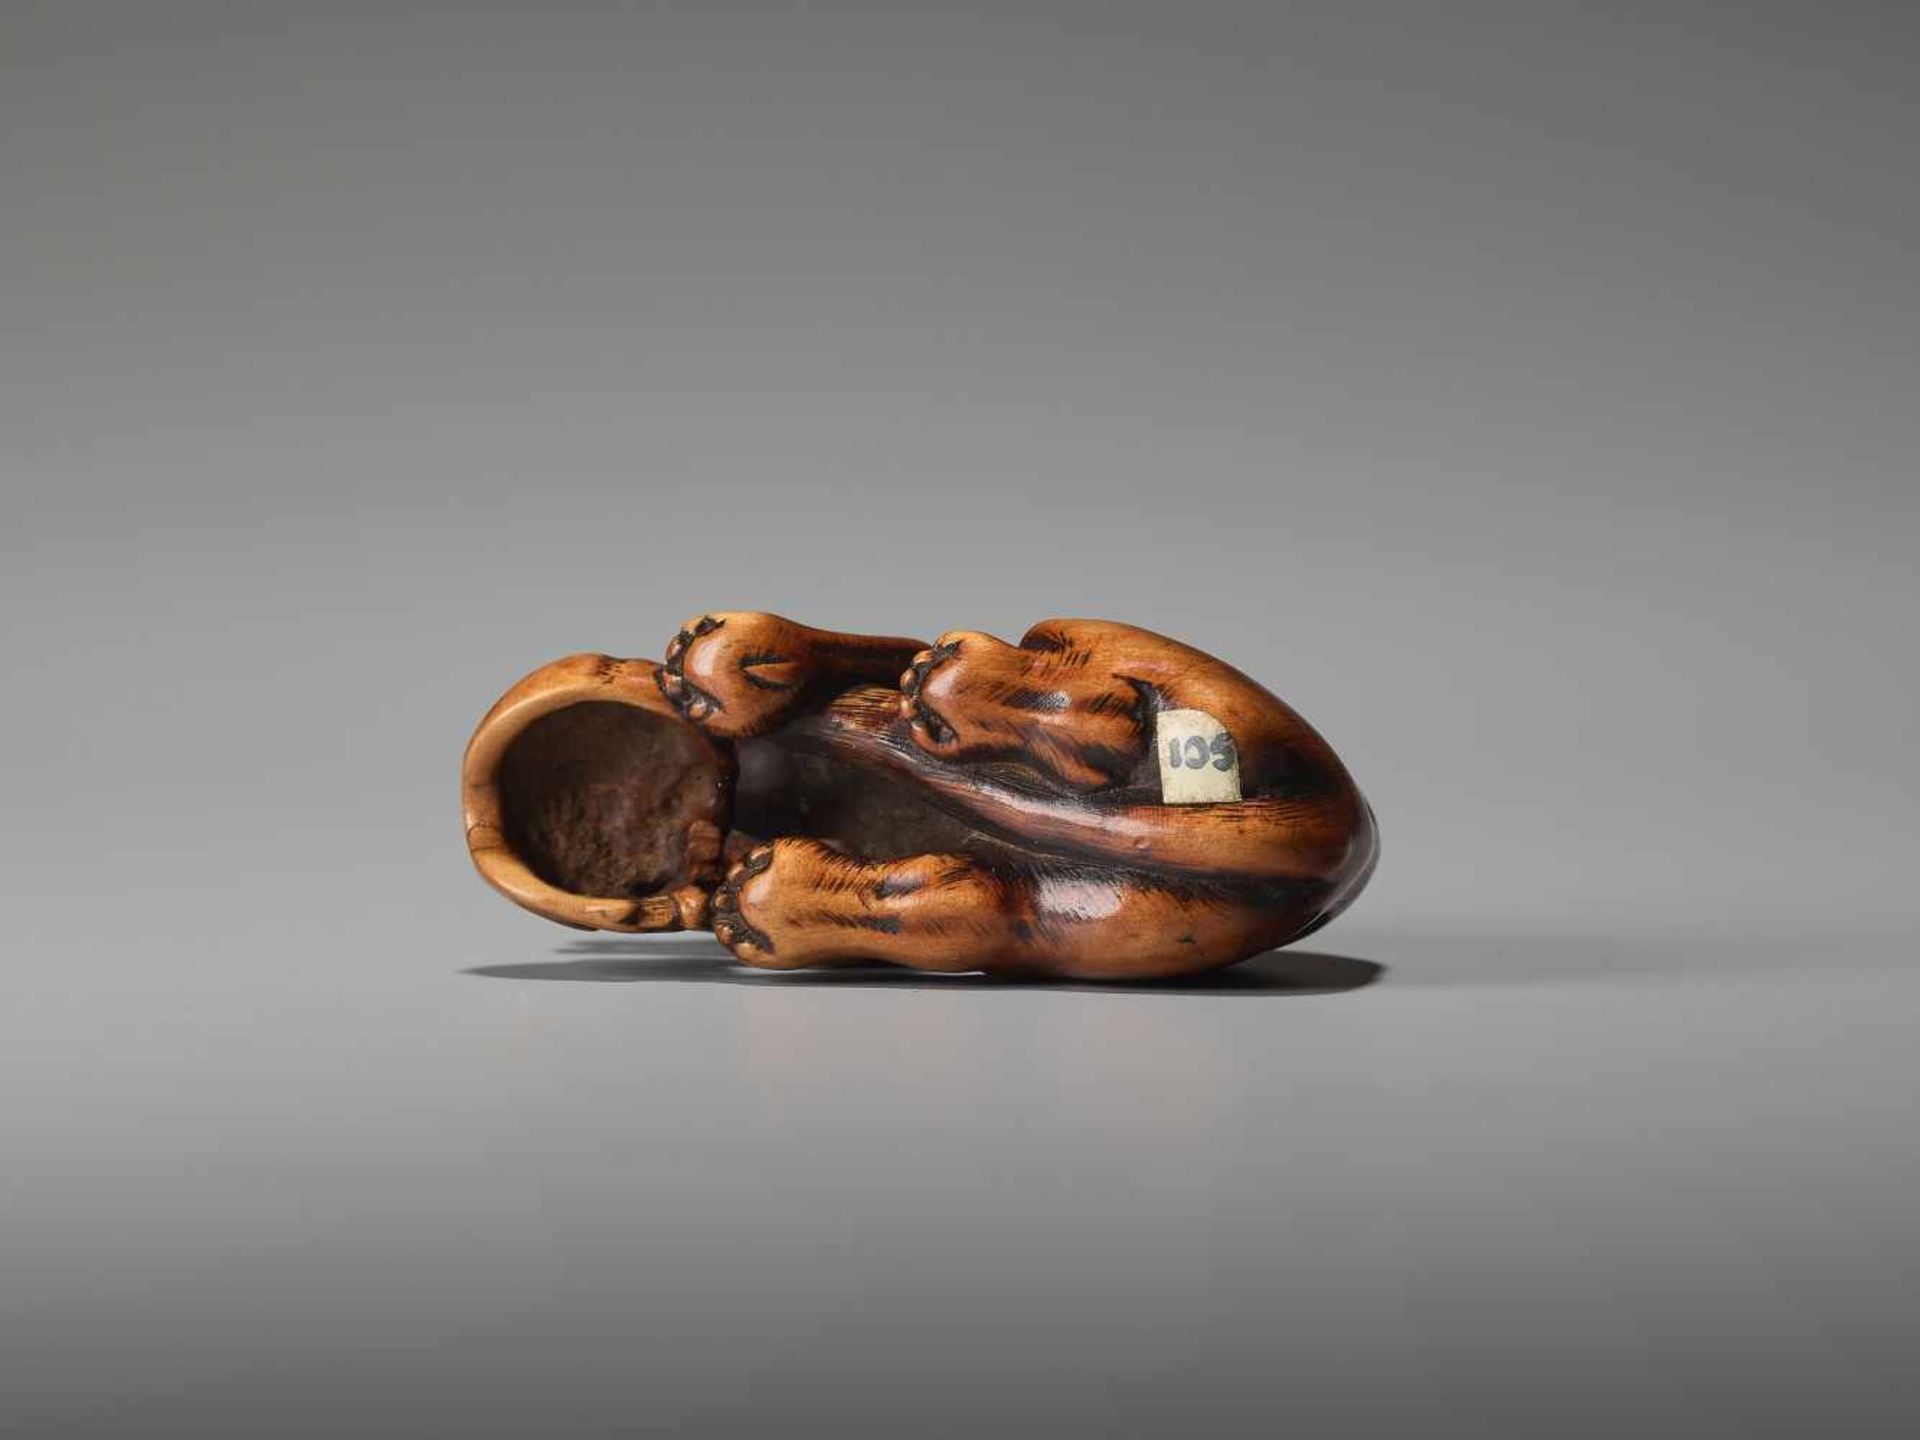 A POWERFUL WOOD NETSUKE OF A WOLF WITH A SKULL UnsignedJapan, 18th century, Edo period (1615-1868) - Image 8 of 9